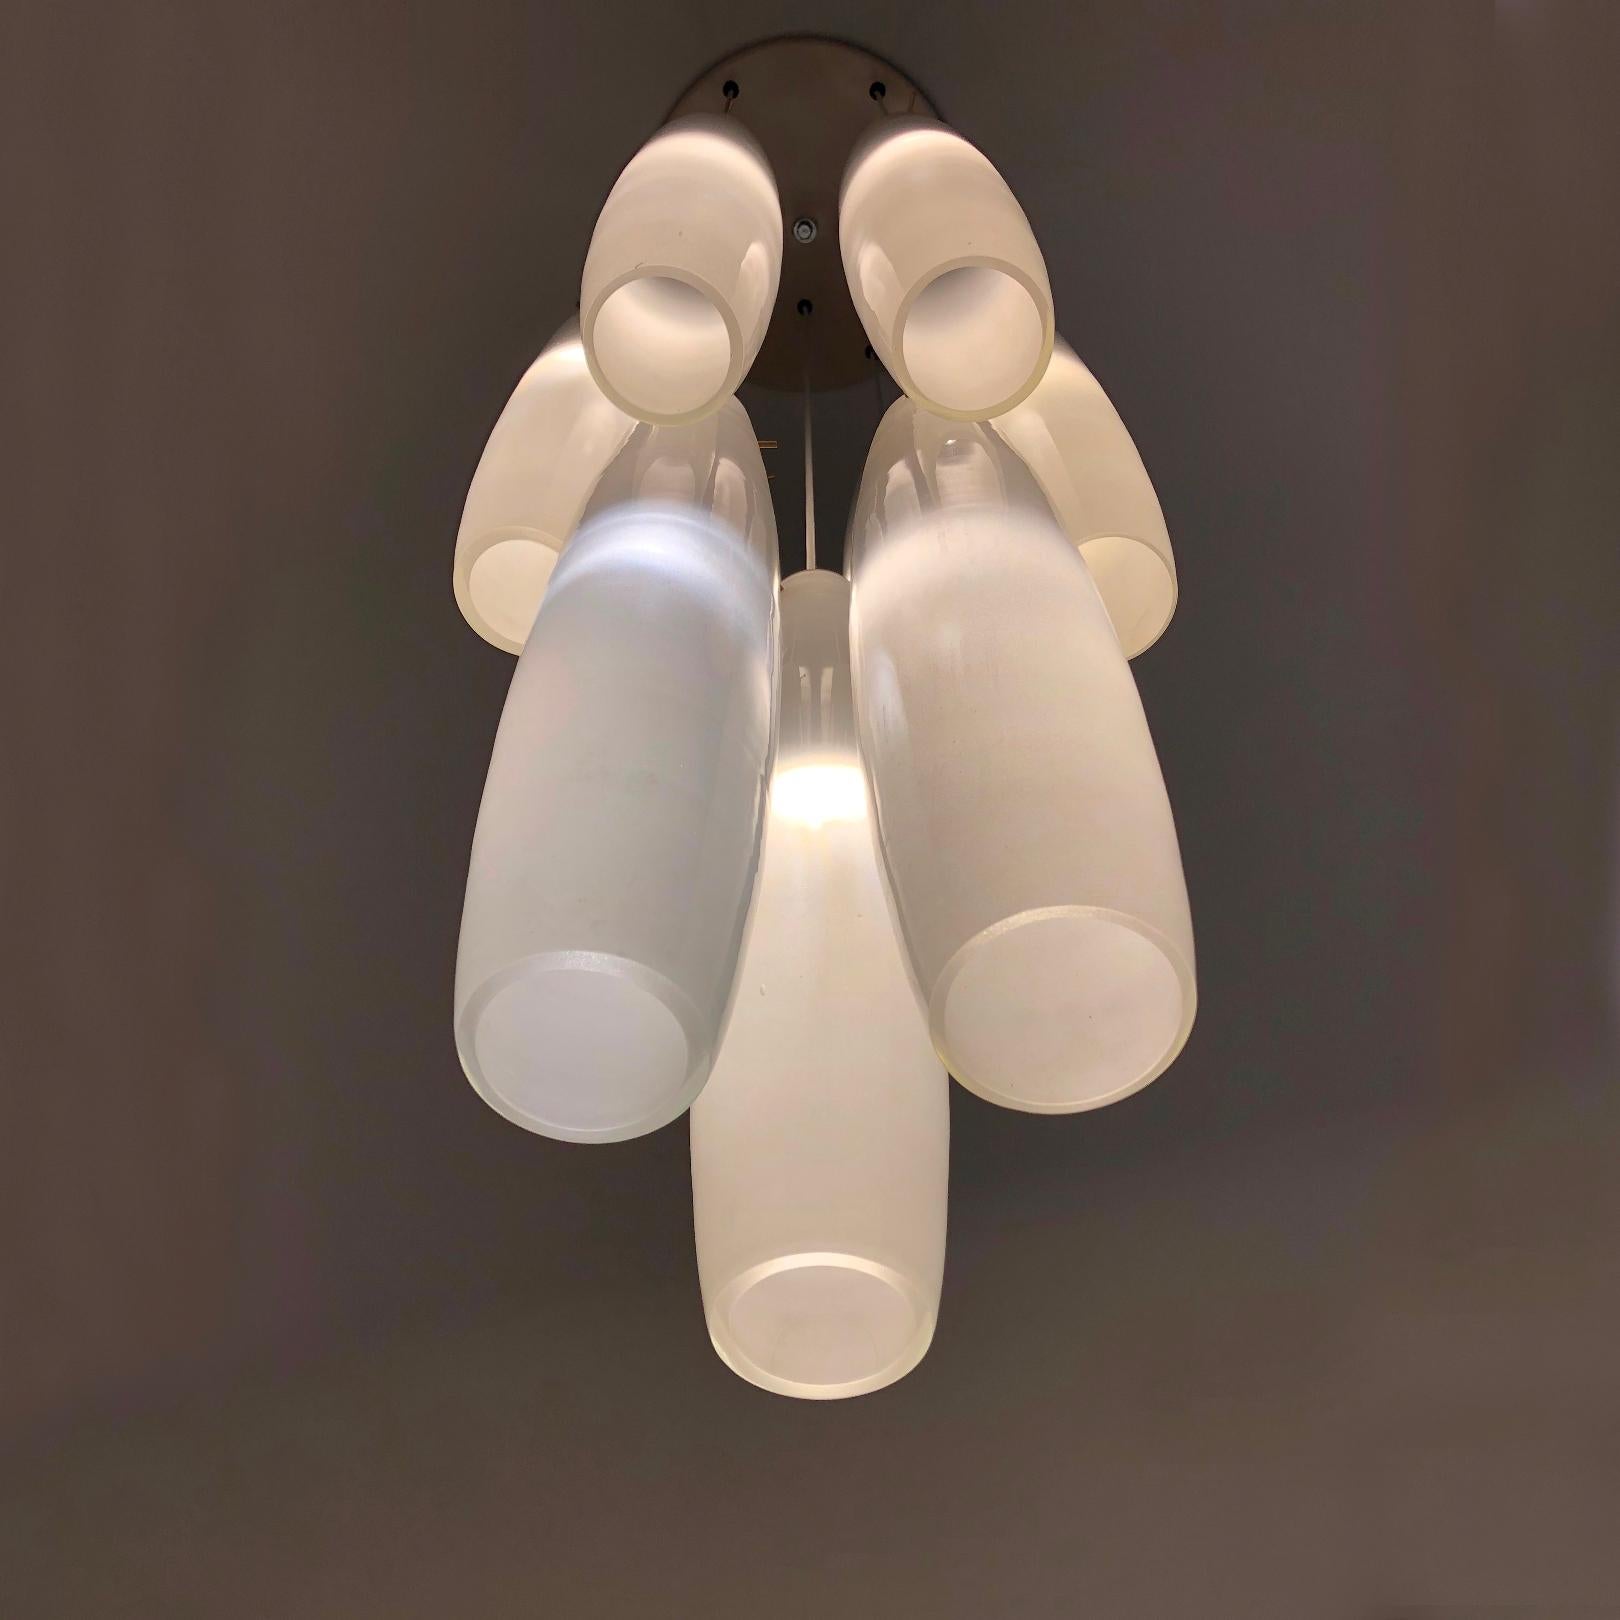 Big White Nine Pendant Chandelier Attributed to Alessandro Pianon, Italy, 1960s (Emailliert) im Angebot